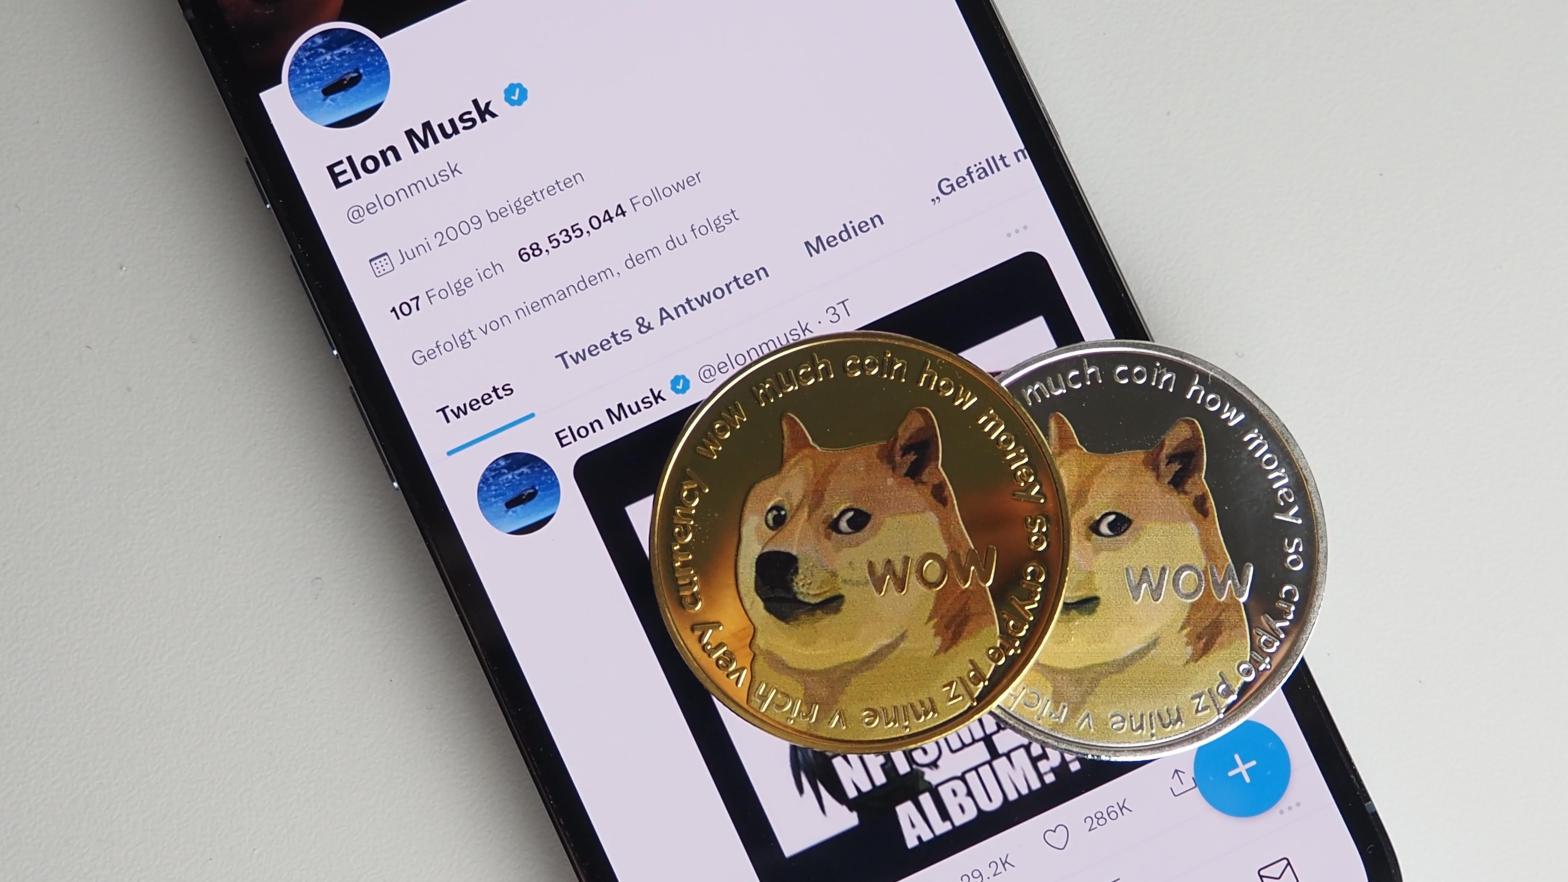 Despite Musk being a proponent of crypto through his promotion of dogecoin, he's apparently pausing a proposed crypto wallet for Twitter so they can instead focus on paid verification and other money-making projects. (Photo: ThomasAFink, Shutterstock)